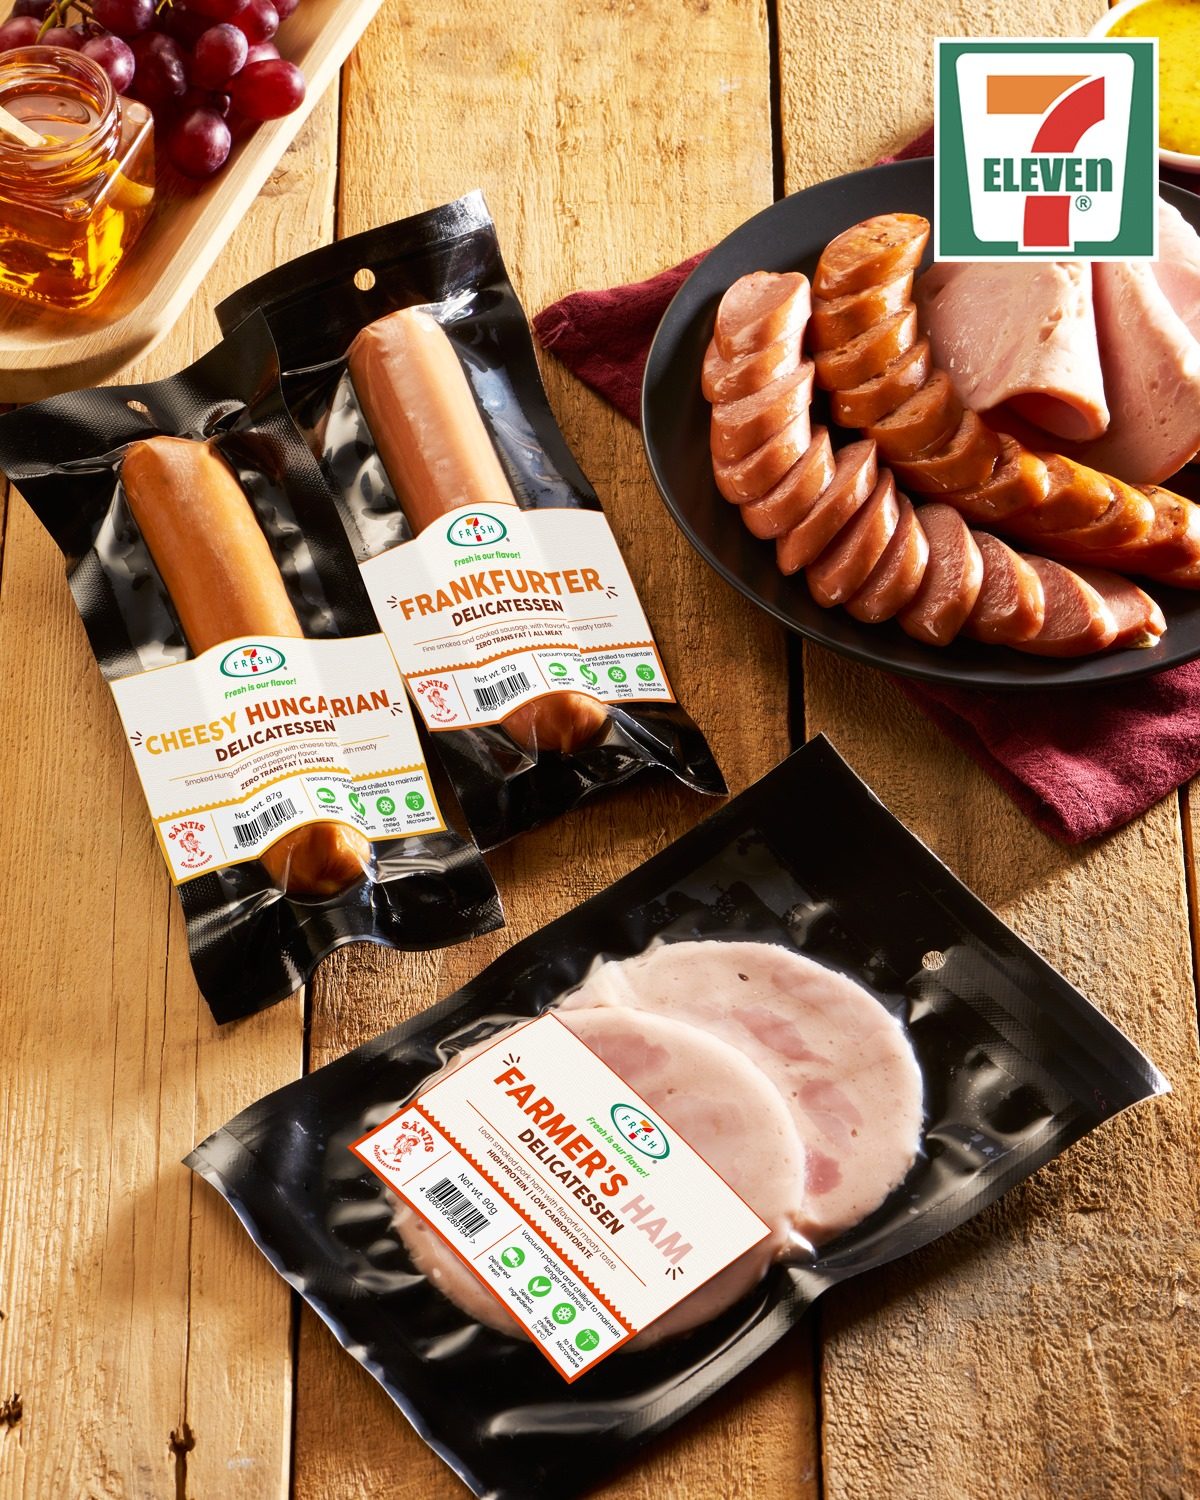 Santis deli meats now available at 7-Eleven stores